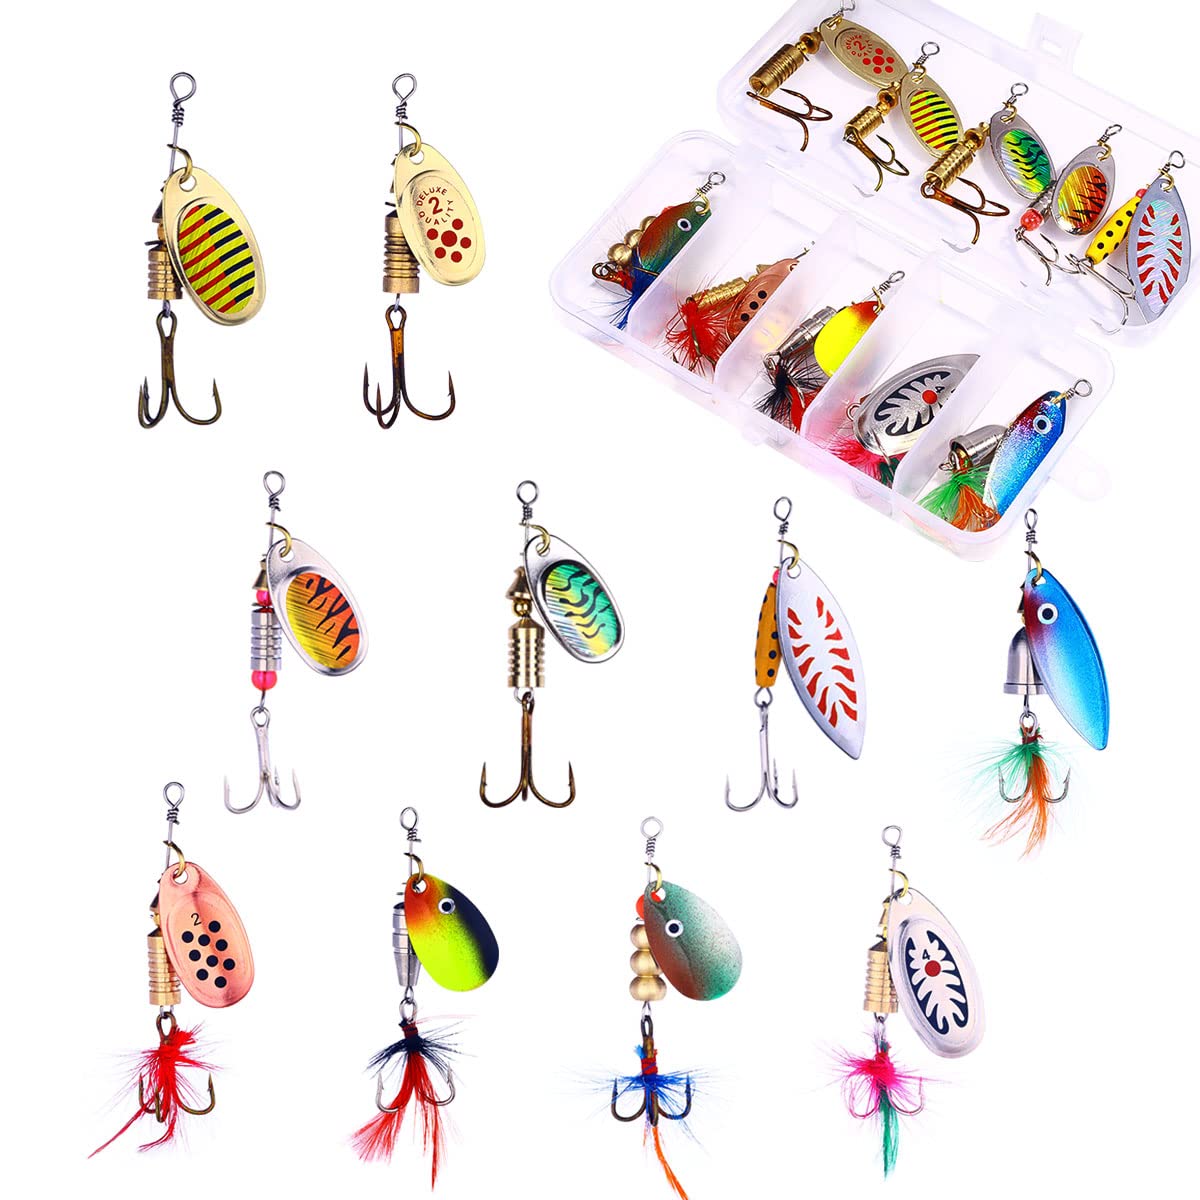 HENGJIA Trout Lures Spinner Baits with 2 Spoons, Rosster Tail Fishing Lures,  Spinnerbait for Bass Fishing